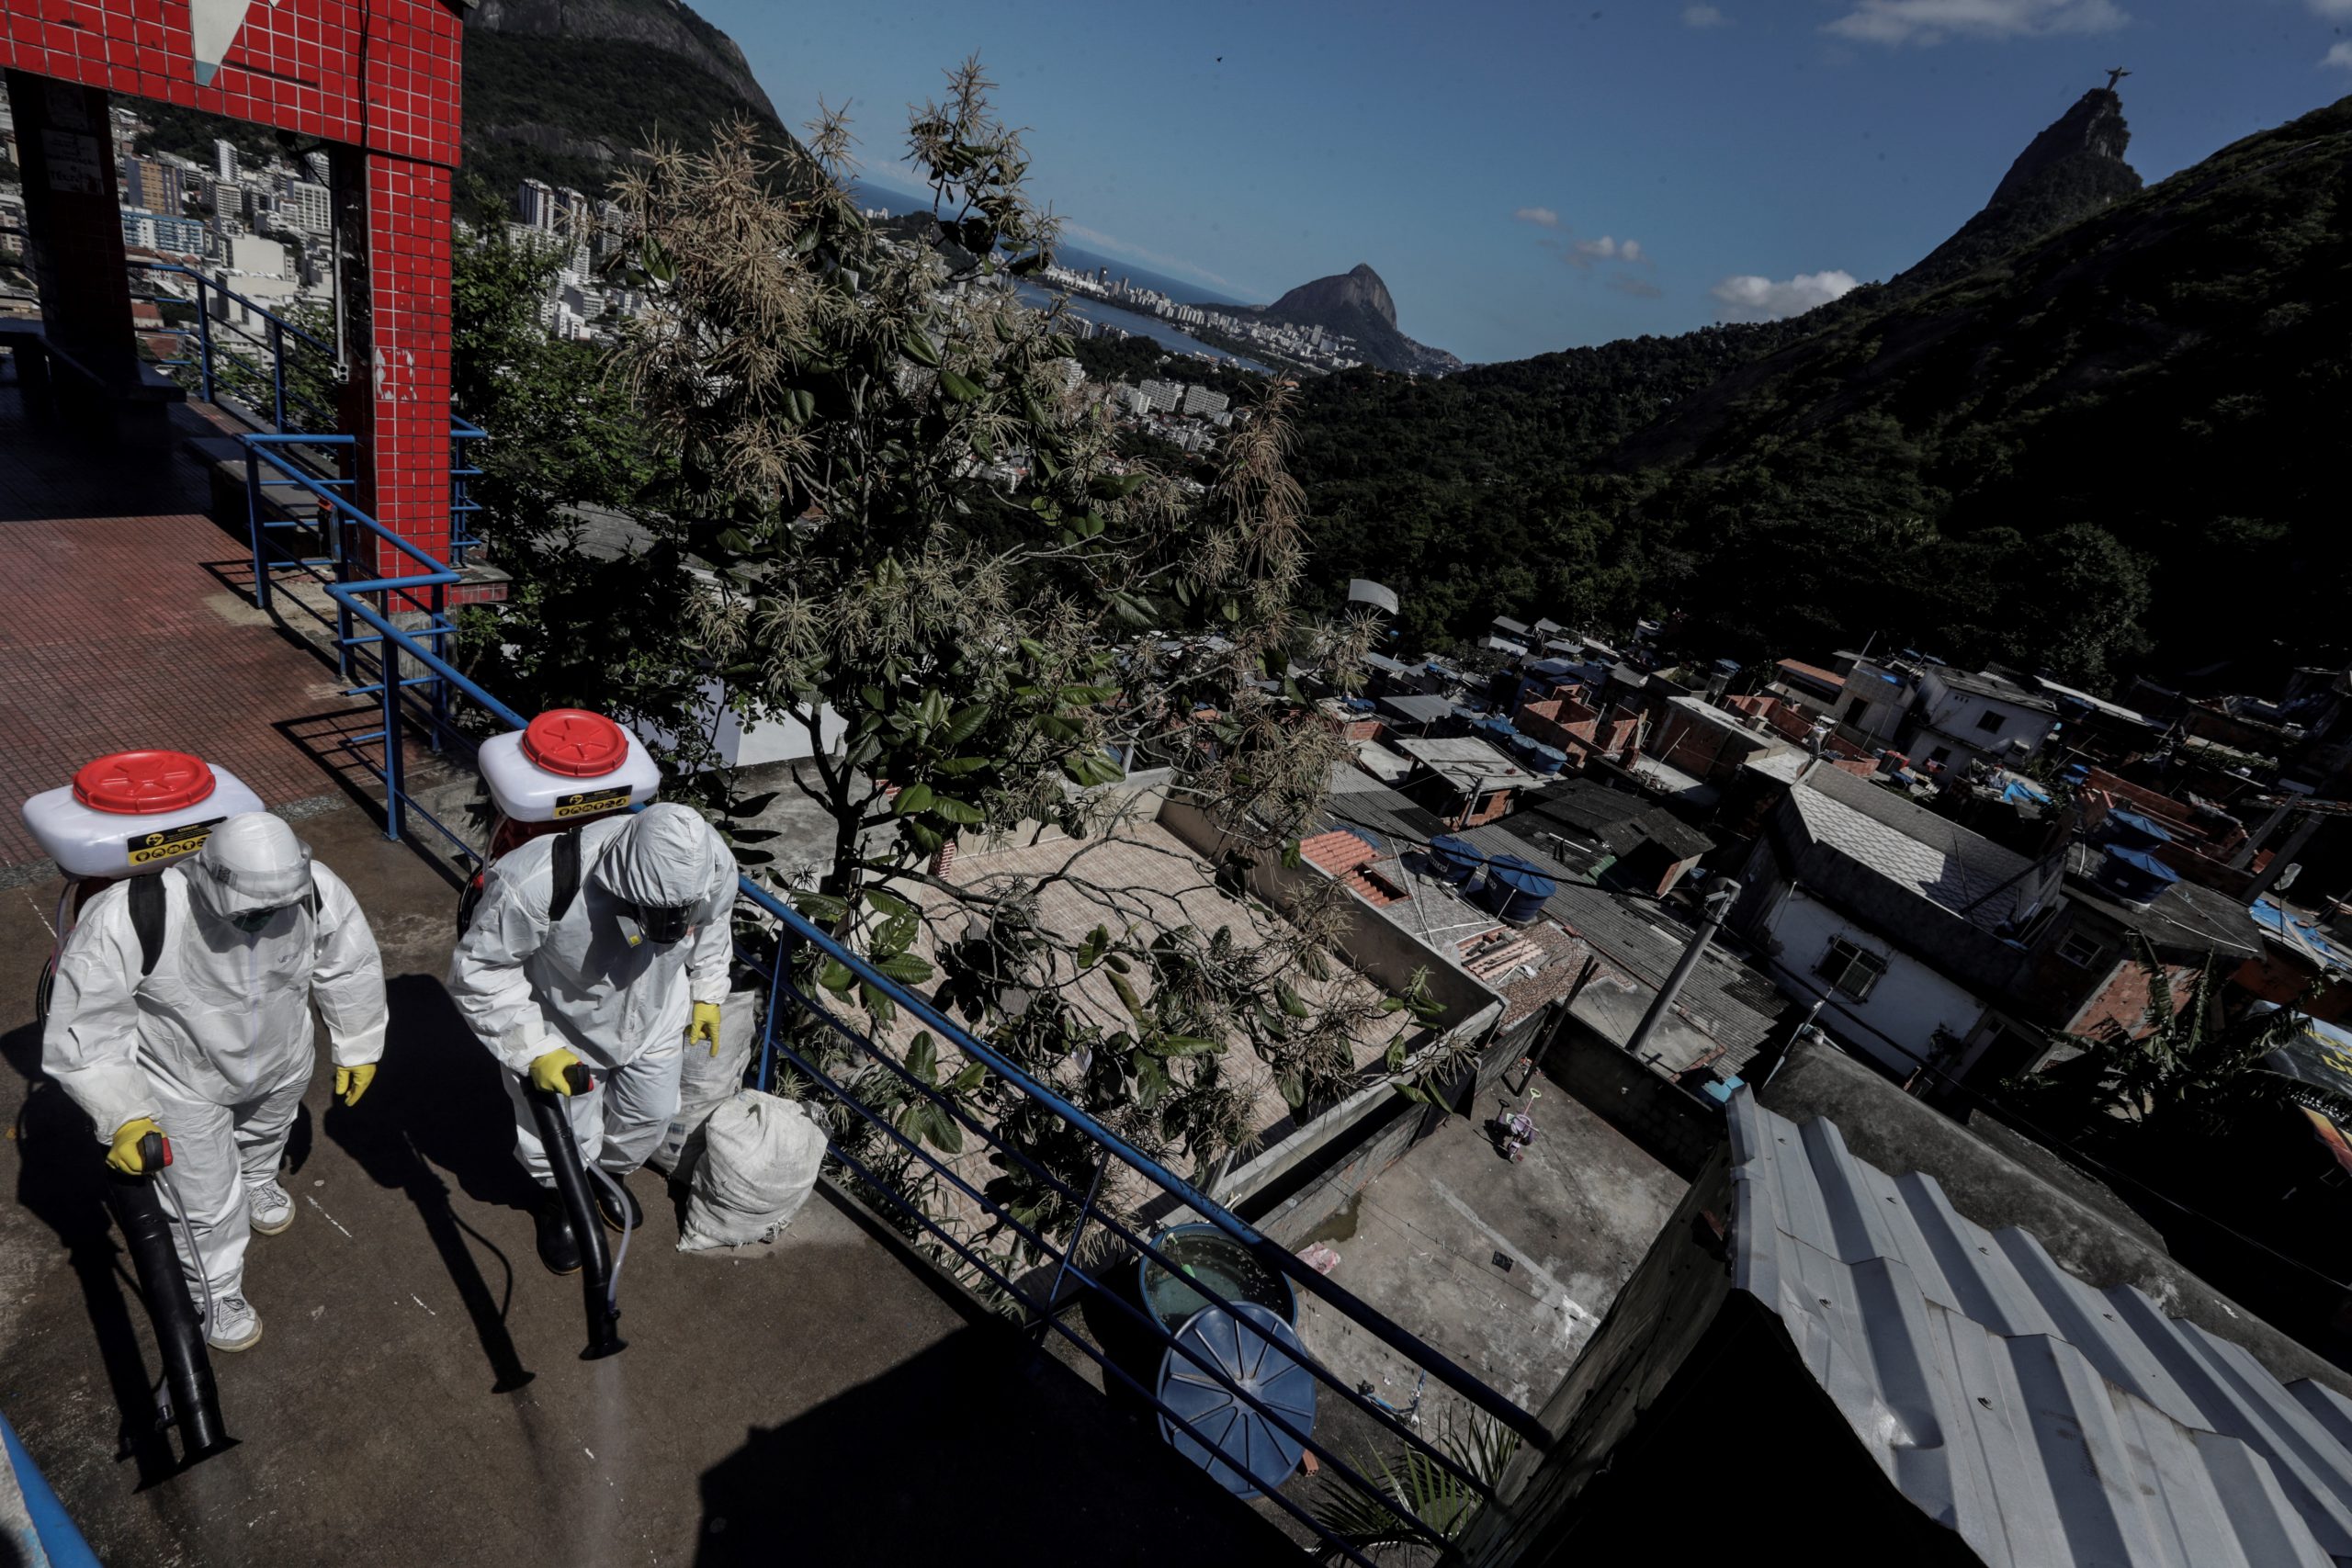 epa08361302 Residents of the Dona Marta favela, in Rio de Janeiro, Brazil 13 April 2020, work to clean up community areas to prevent the lack of sanitary conditions from facilitating the spread of the coronavirus.  EPA/Antonio Lacerda